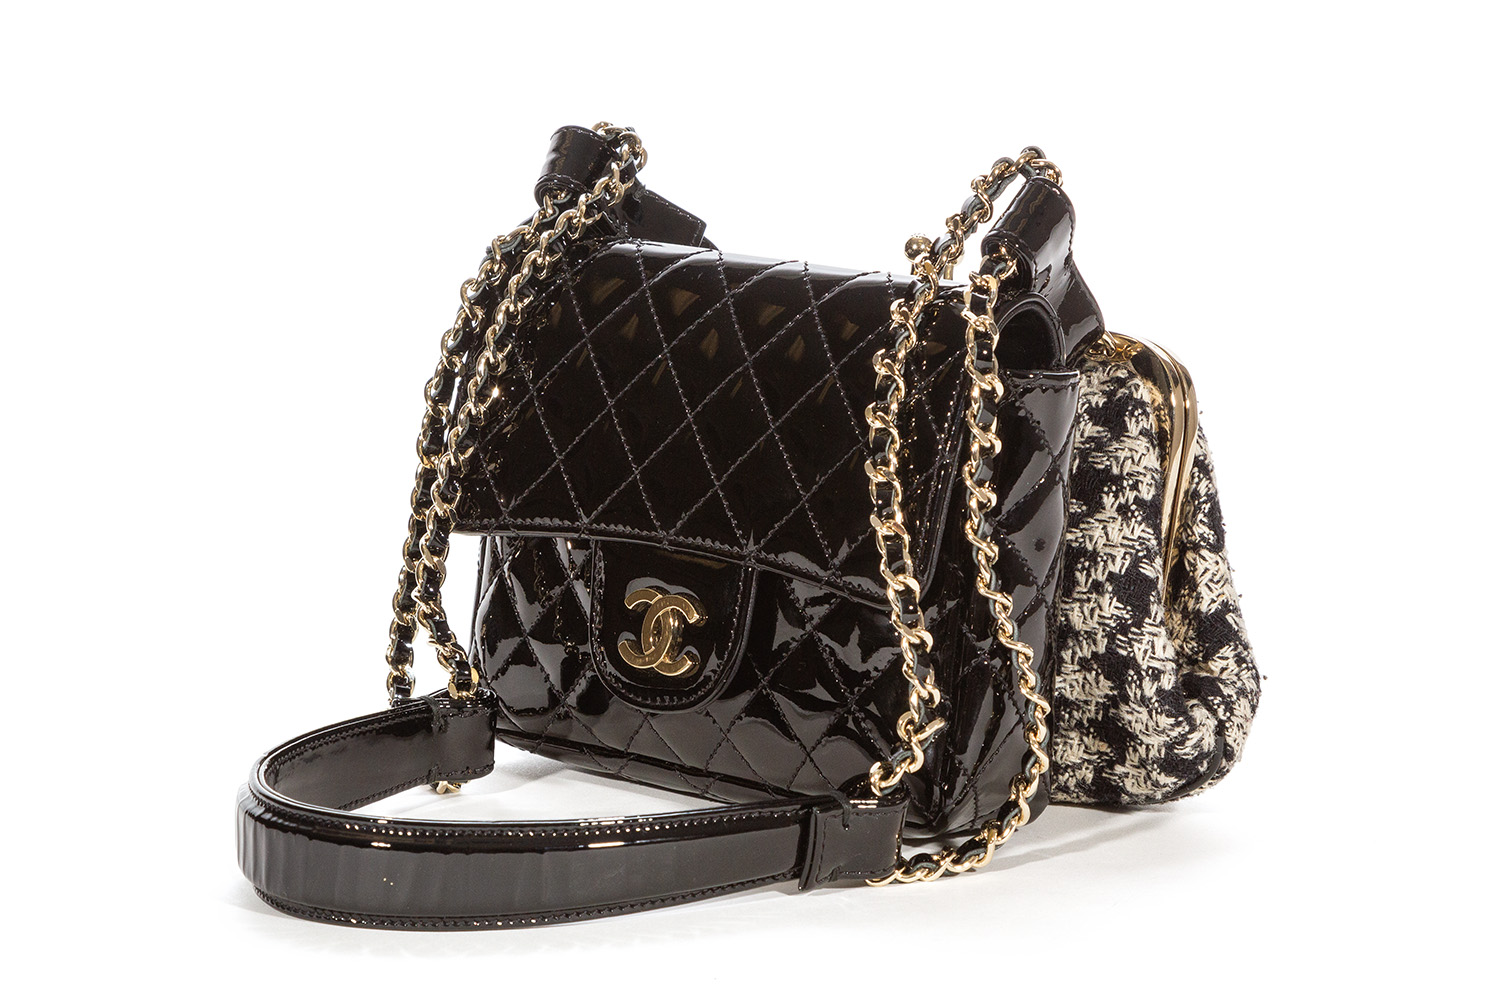 Rare Chanel Exclusive Edition Ginza Patent Lace Mini Kiss Lock Flap Double  Bag